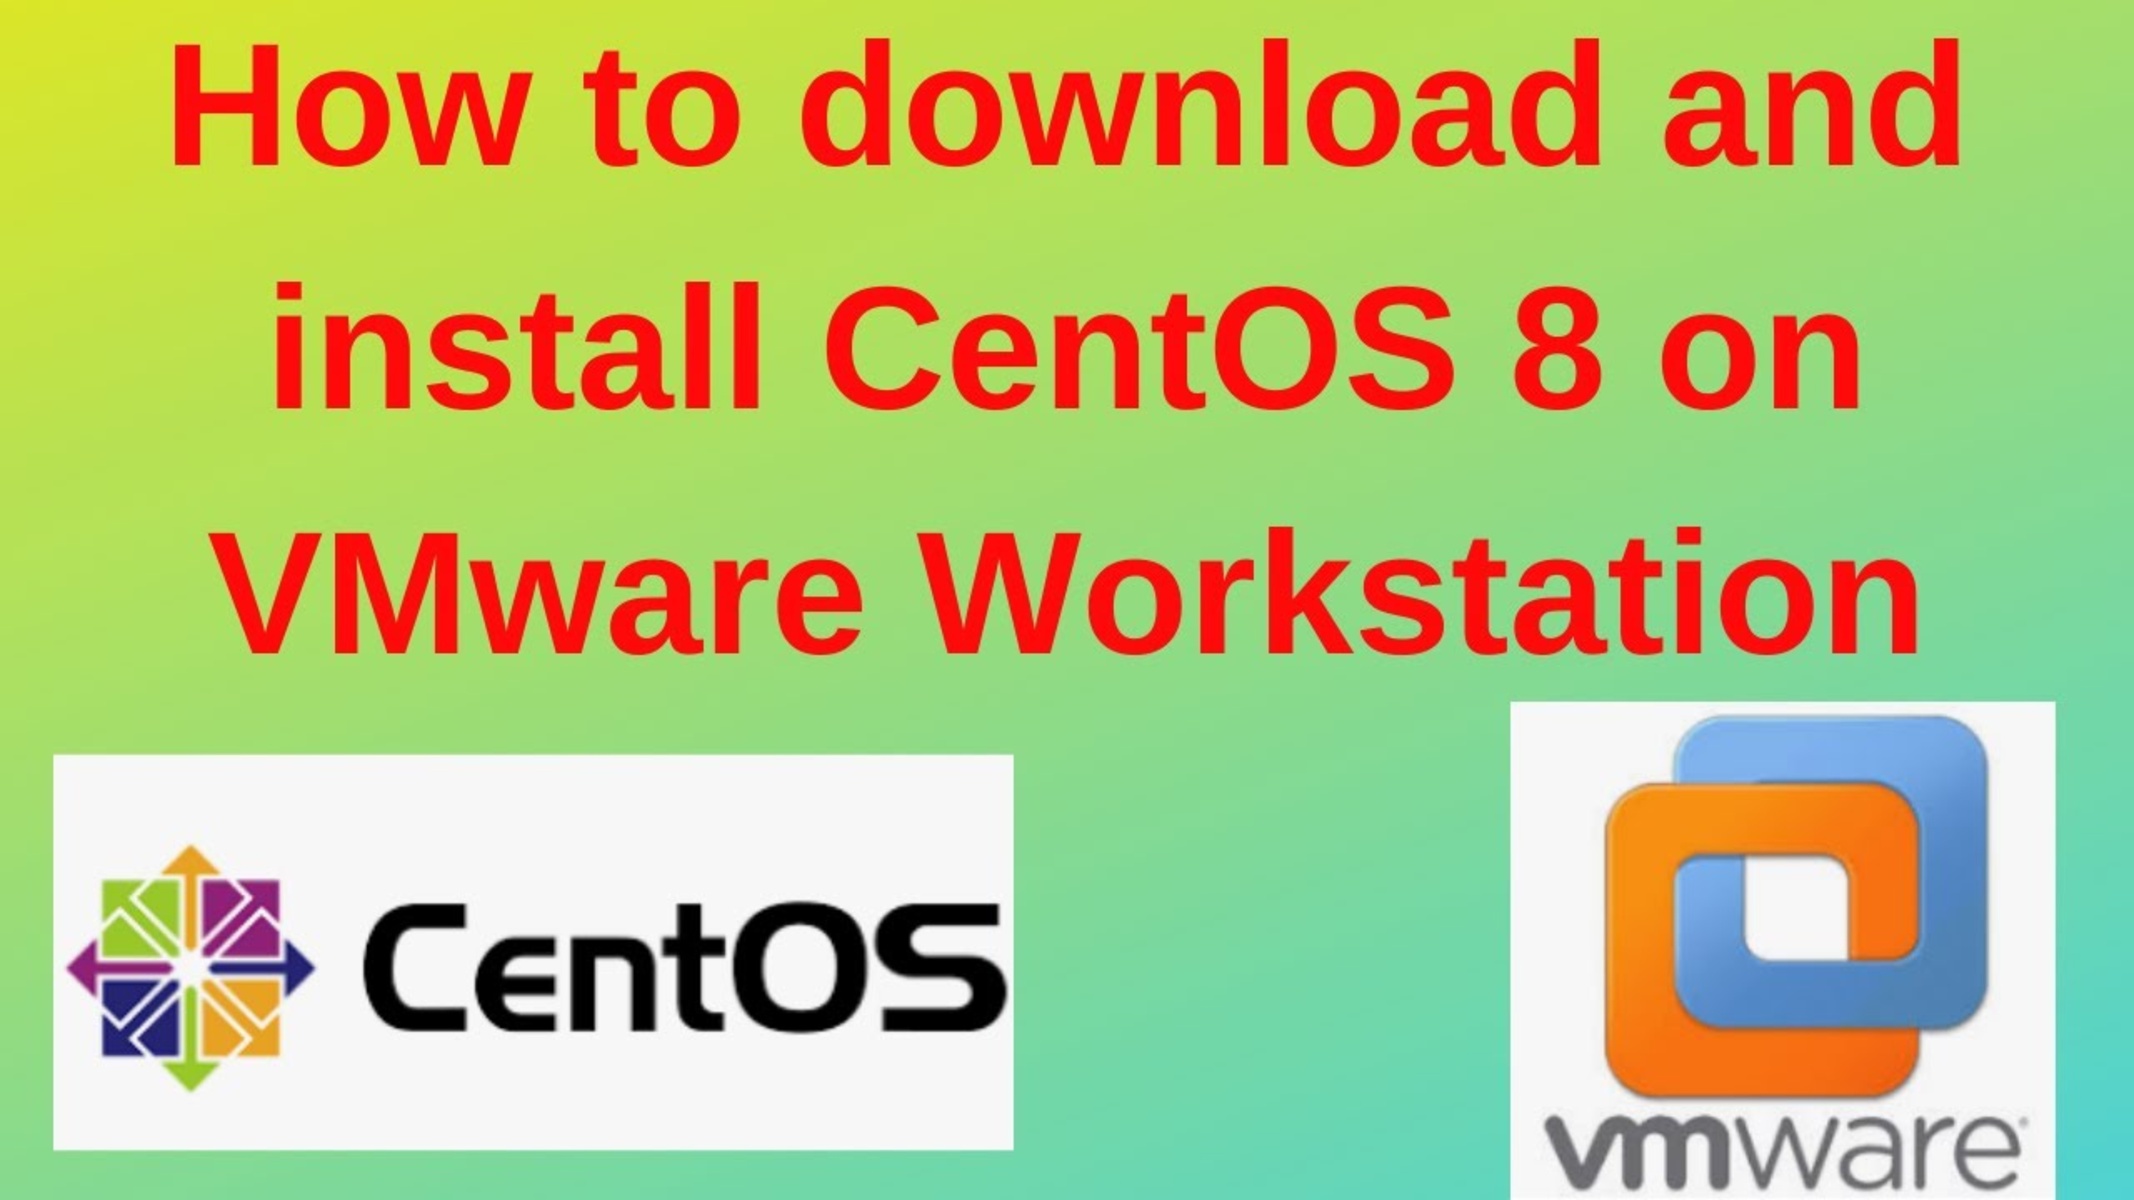 How To Create A CentOS 8 VM In VMware Workstation